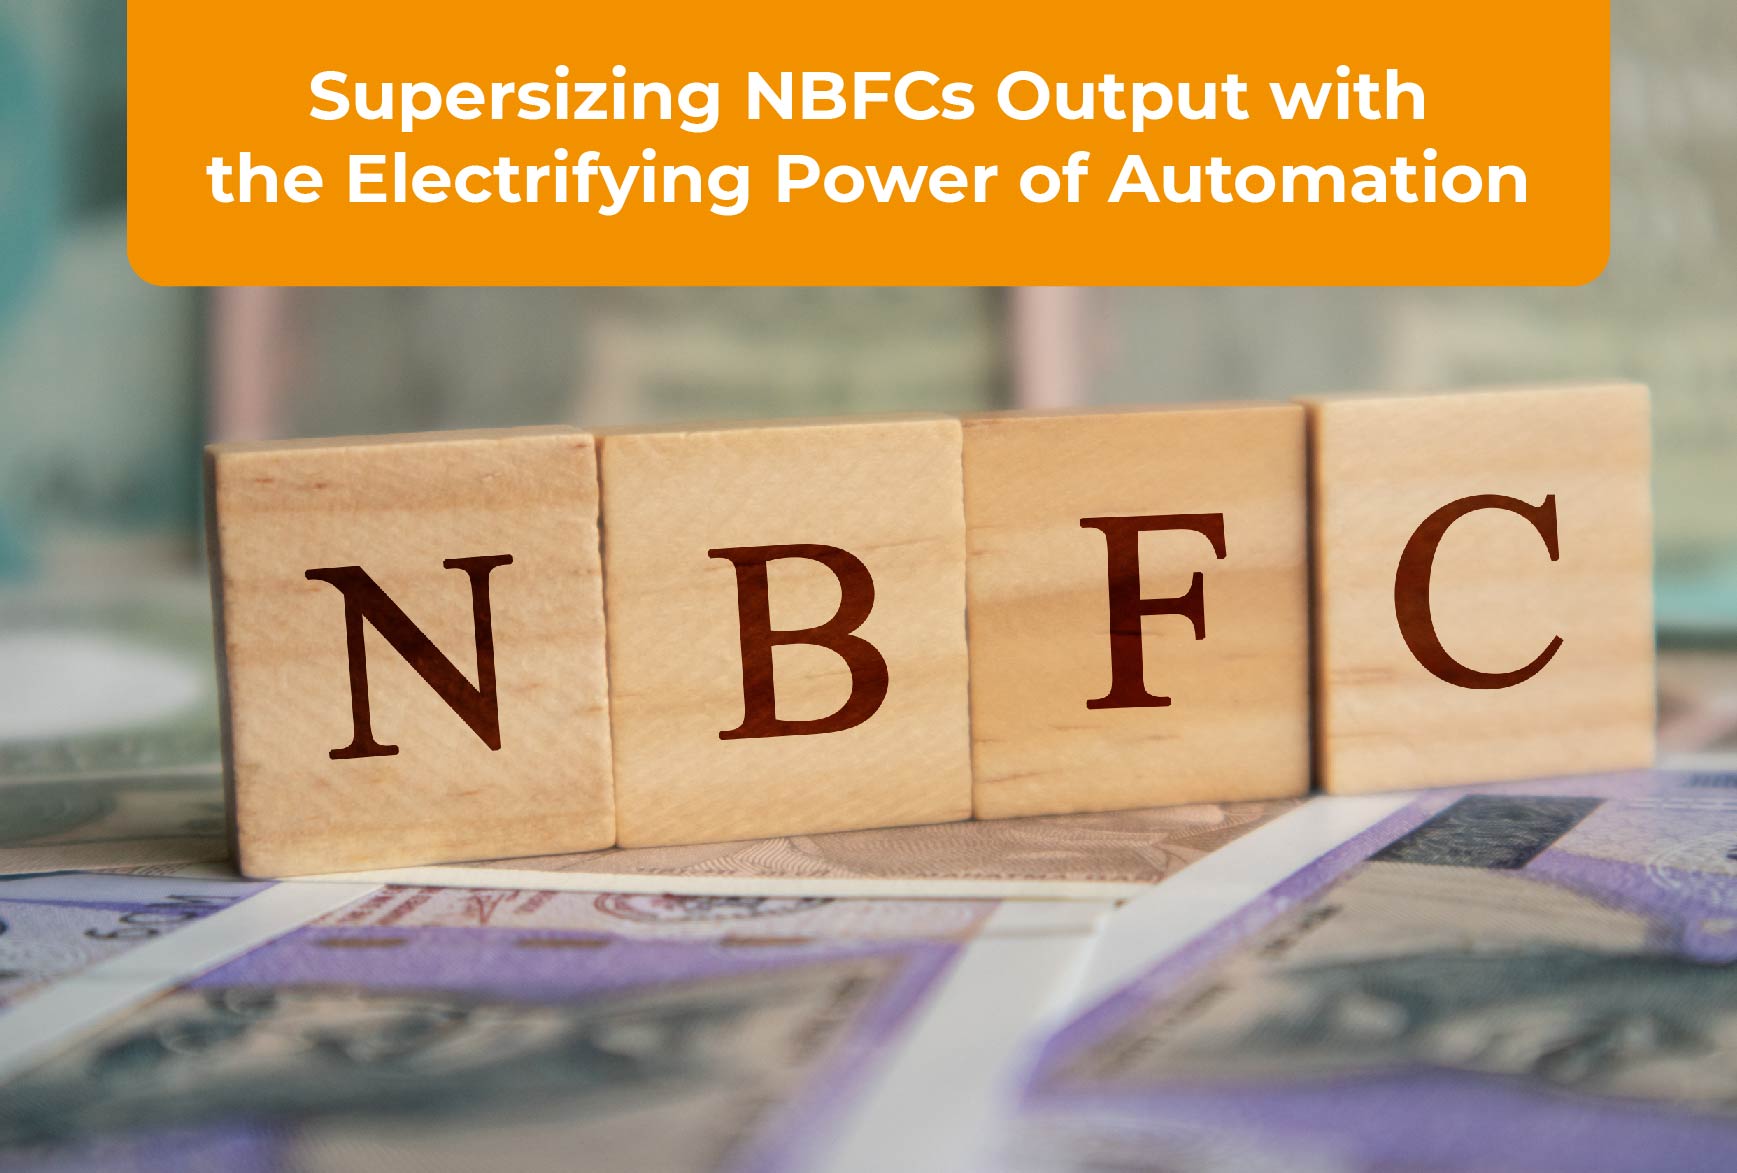 Supersizing NBFCs Output with the Electrifying Power of Automation